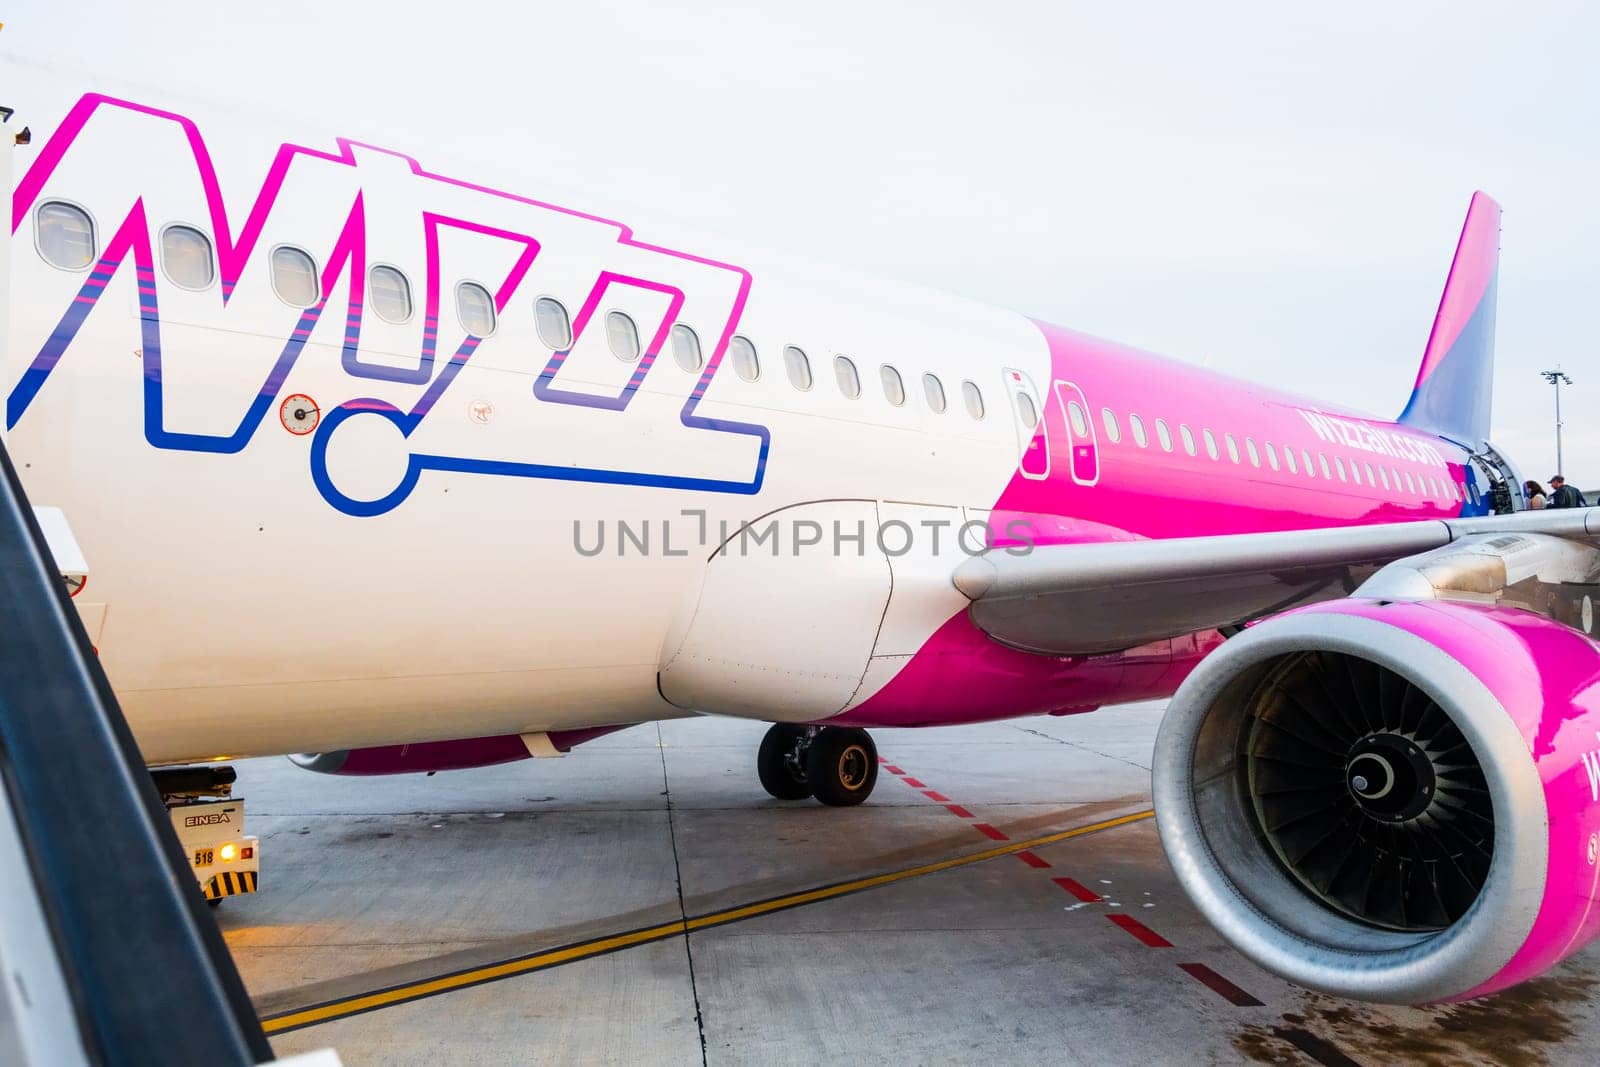 The Wizzair aircraft is prepared for passenger boarding. by vladimka